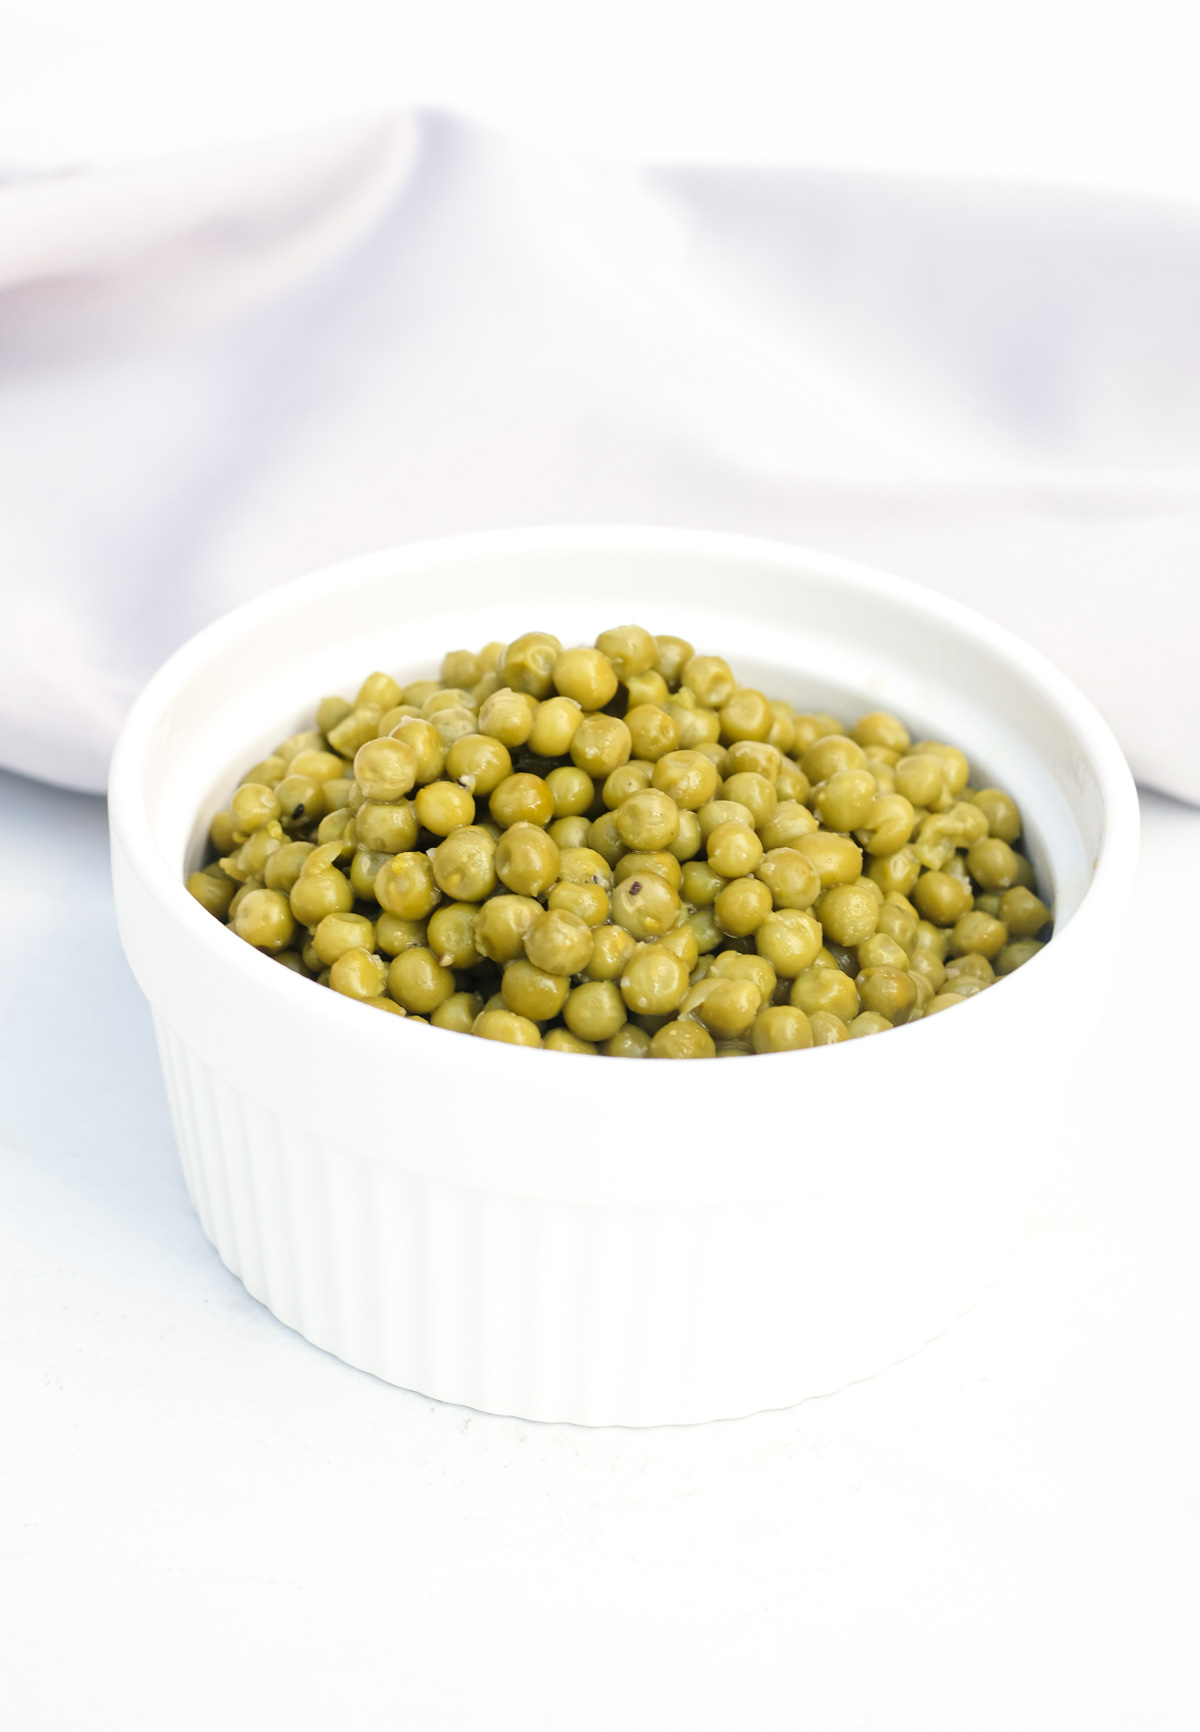 the finished product of the how to cook canned peas recipe